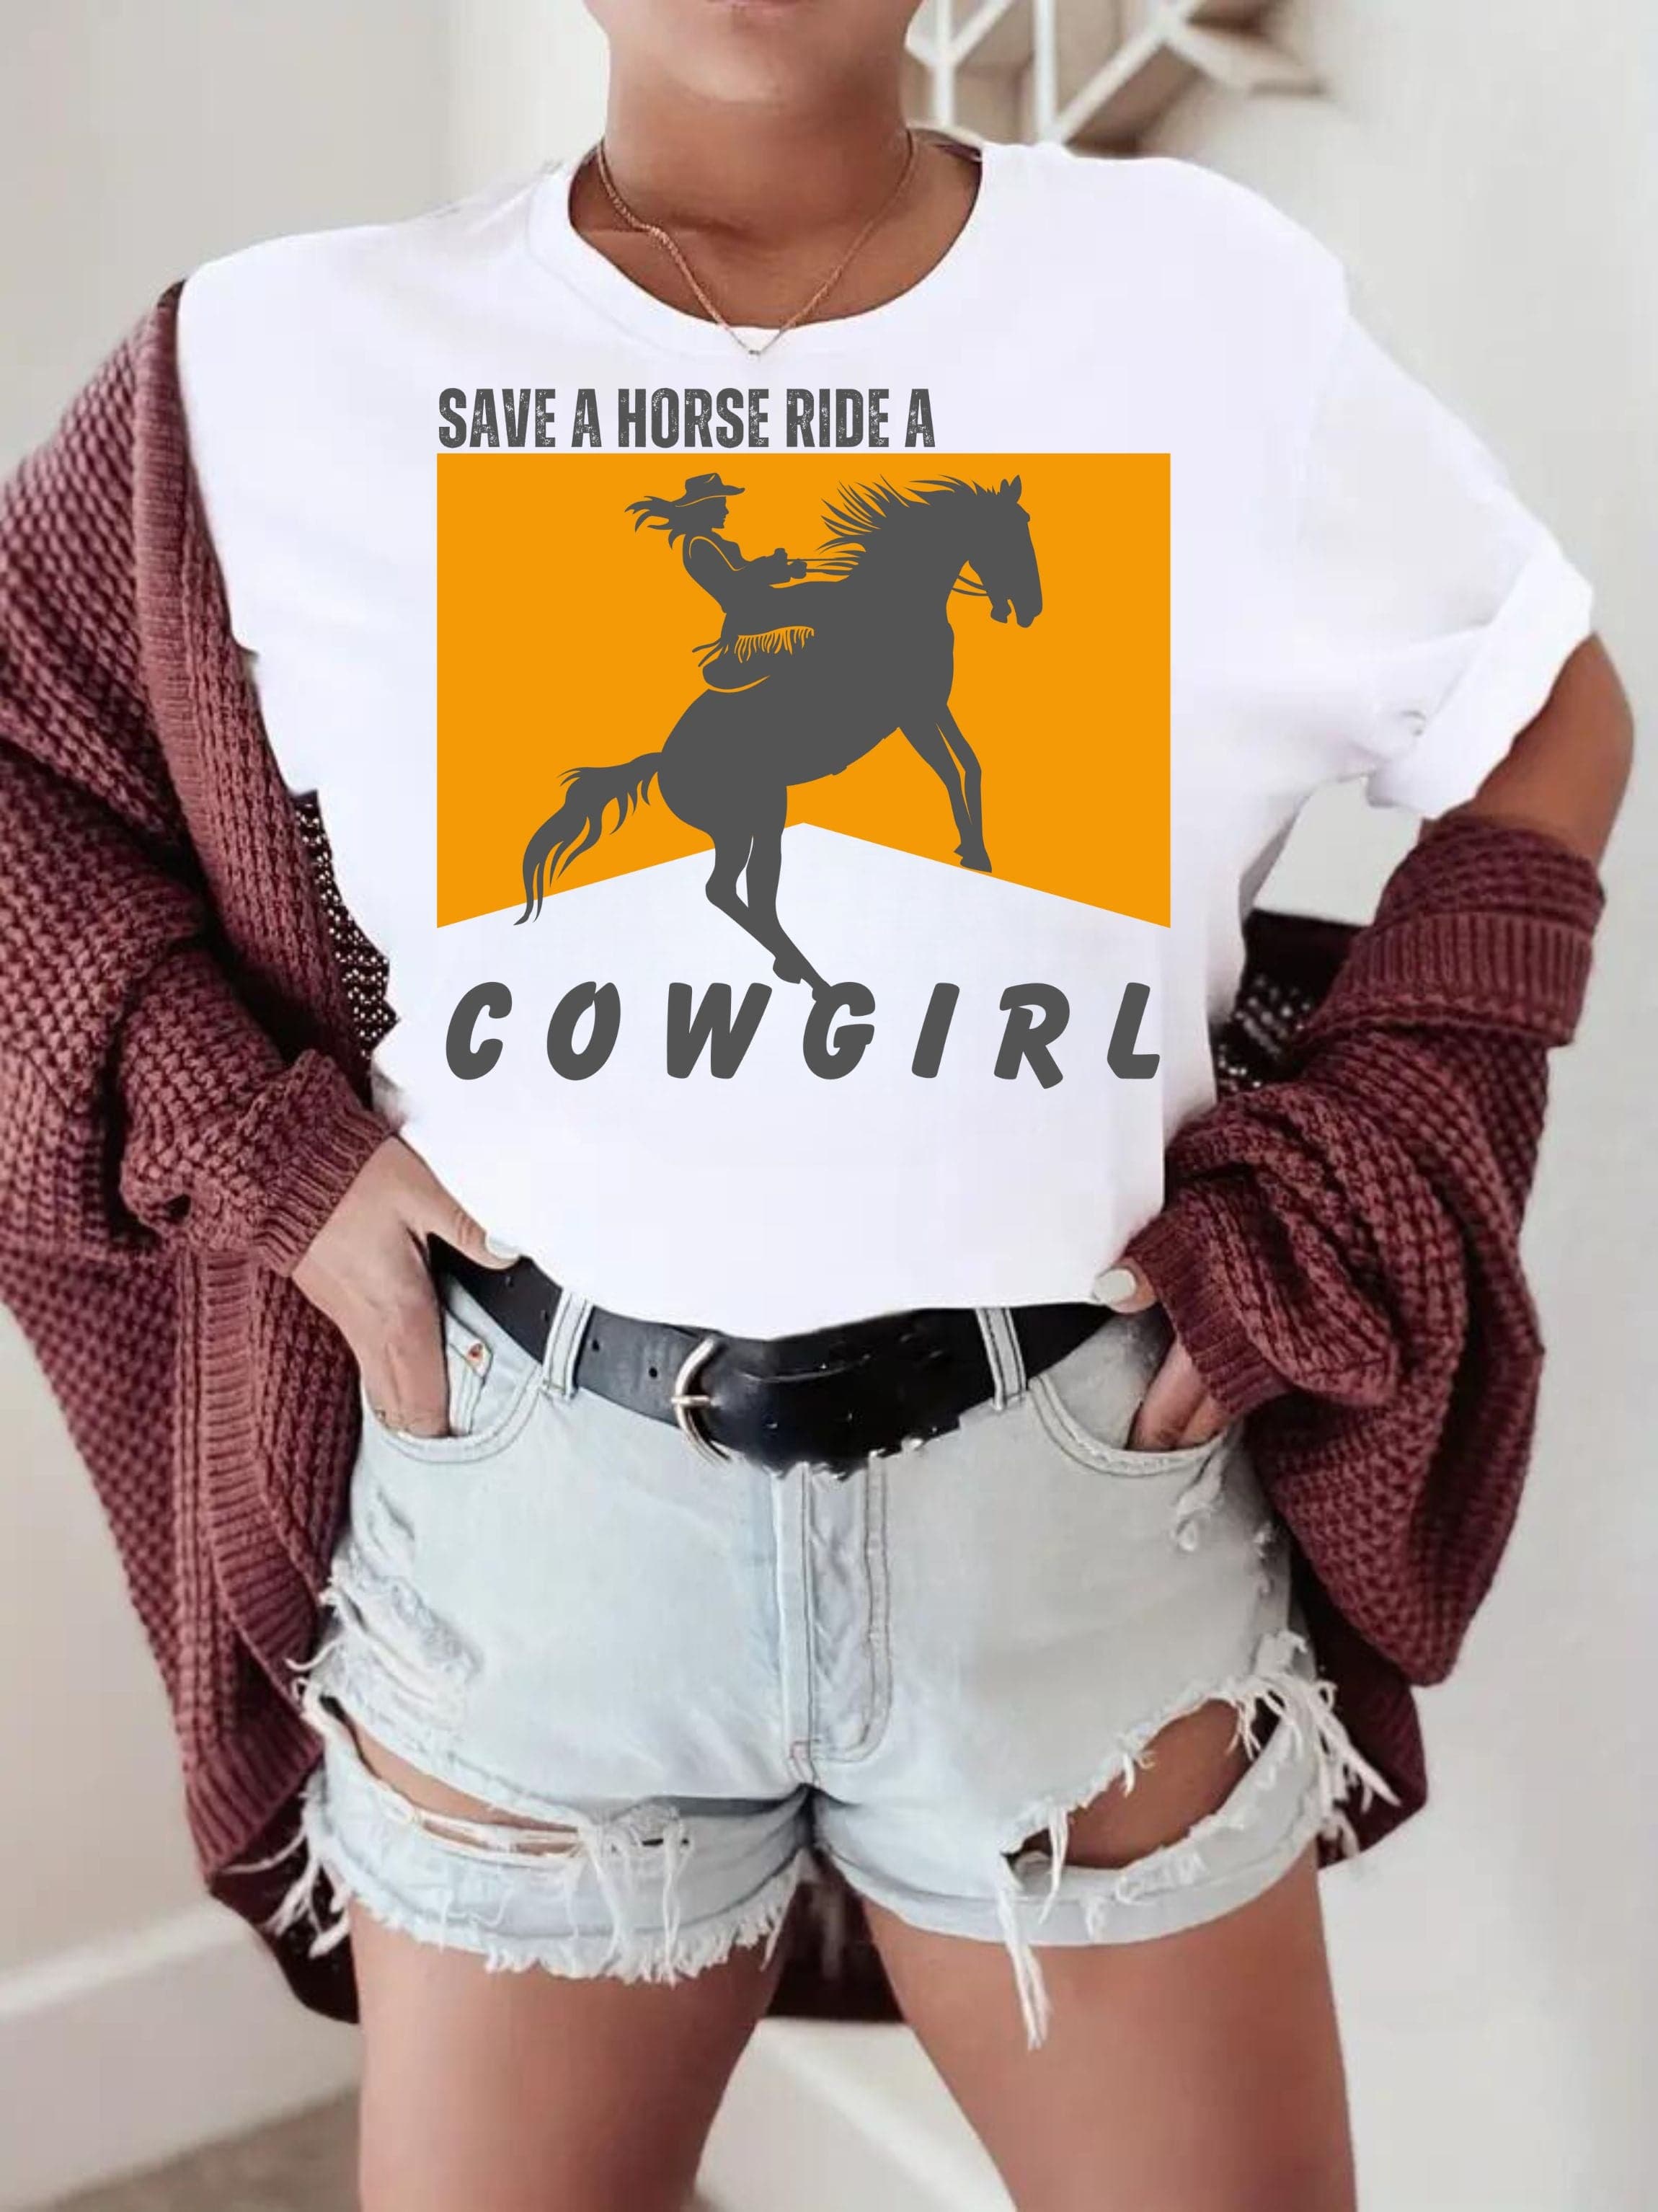 Save A Horse Ride a Cowgirl Unisex t-shirt